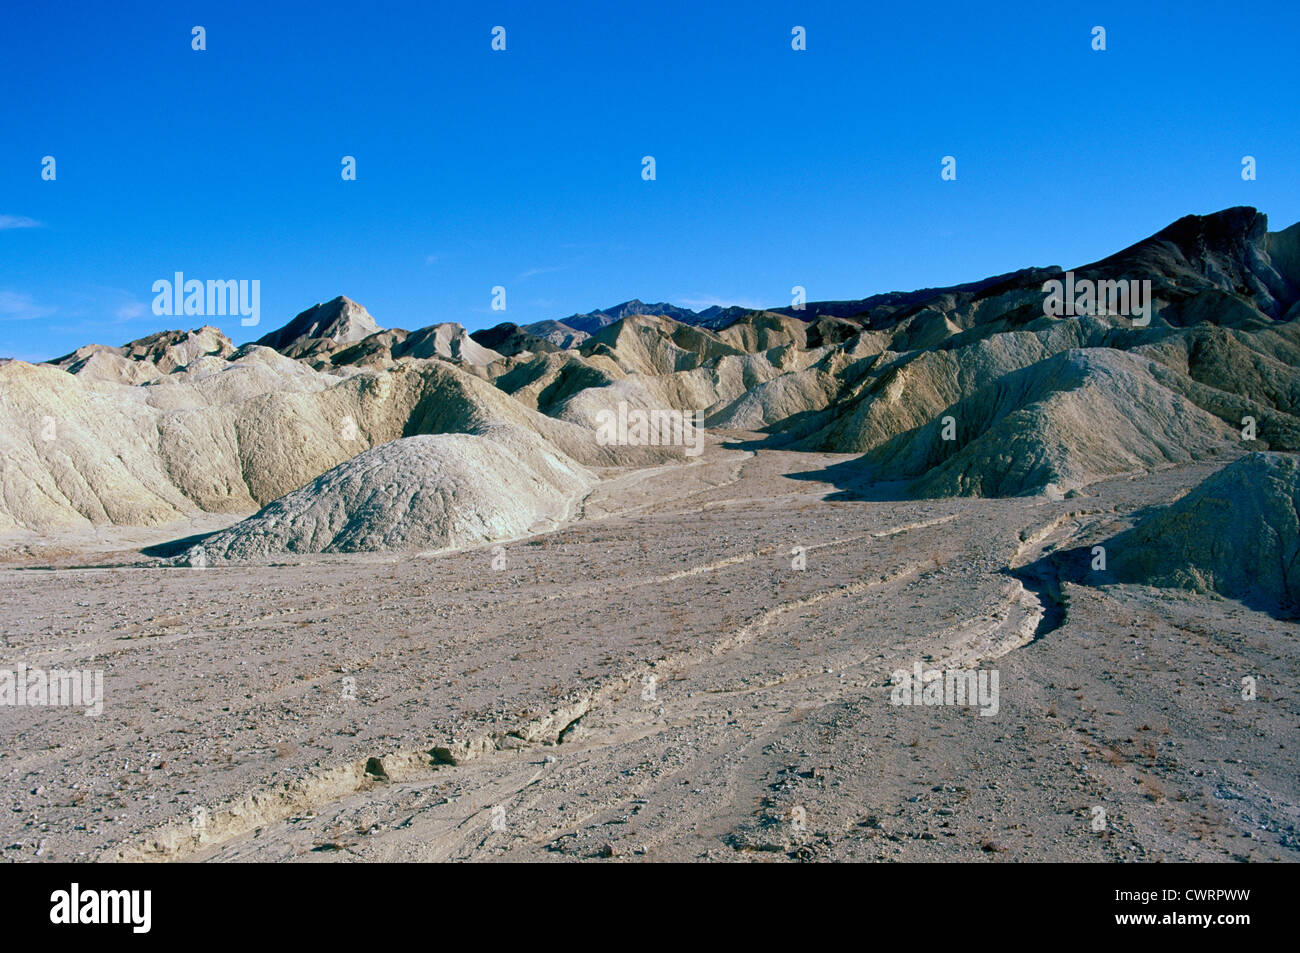 Death Valley National Park, California, USA - Alluvial Fan and Eroded Landscape from Zabriskie Point in Amargosa Range Mountains Stock Photo